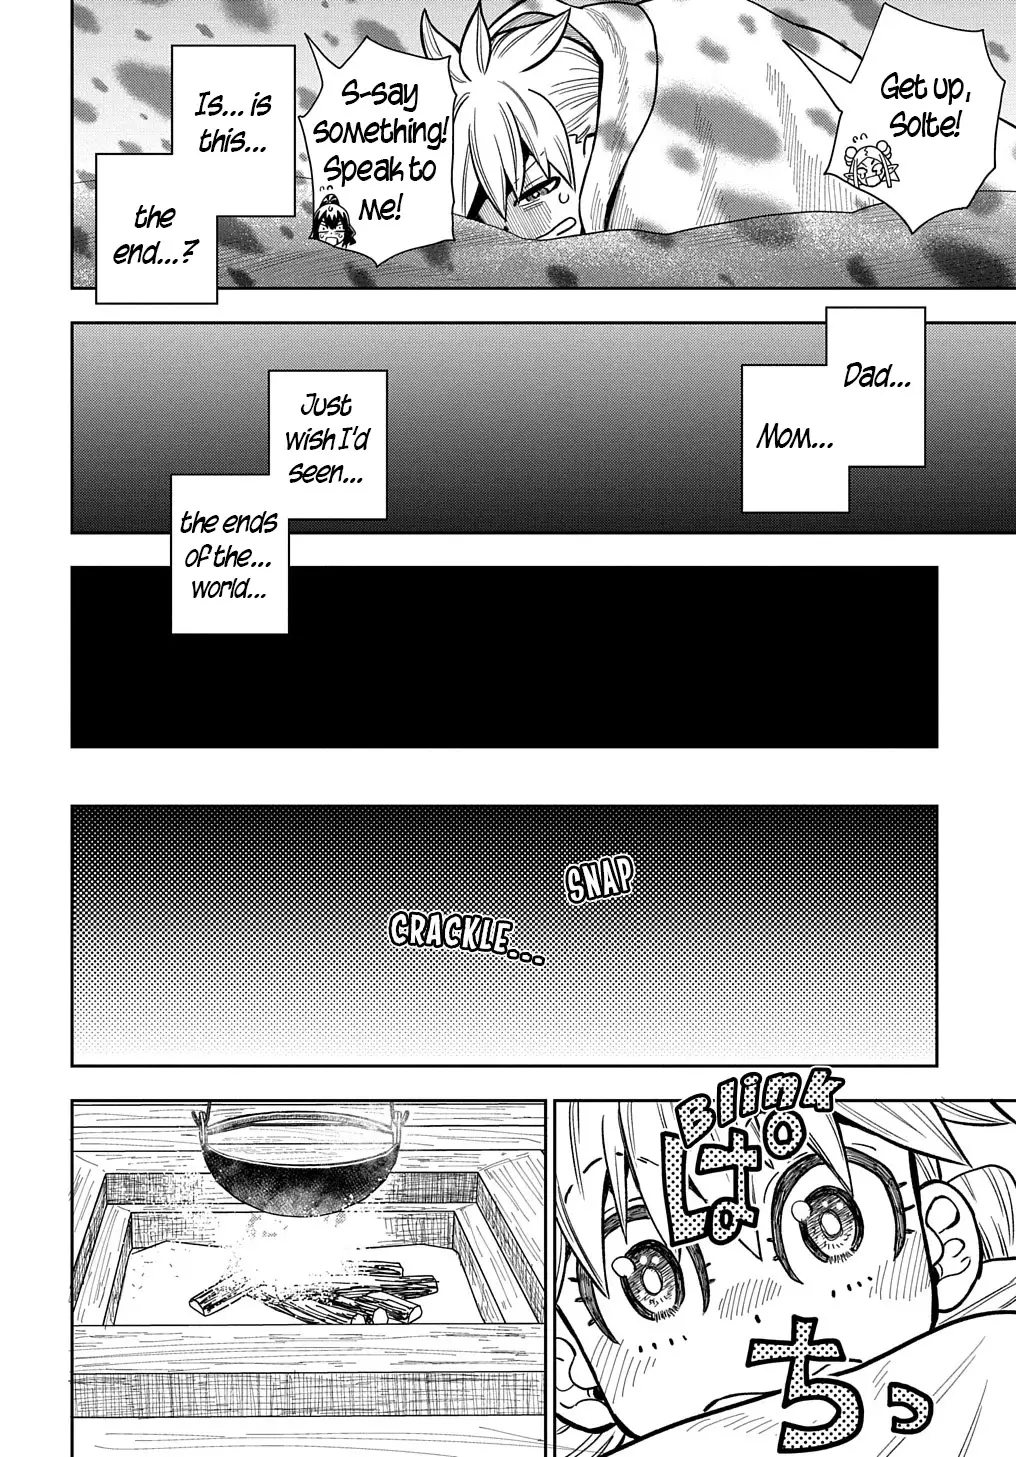 World End Solte - 9 page 14-4557ca03